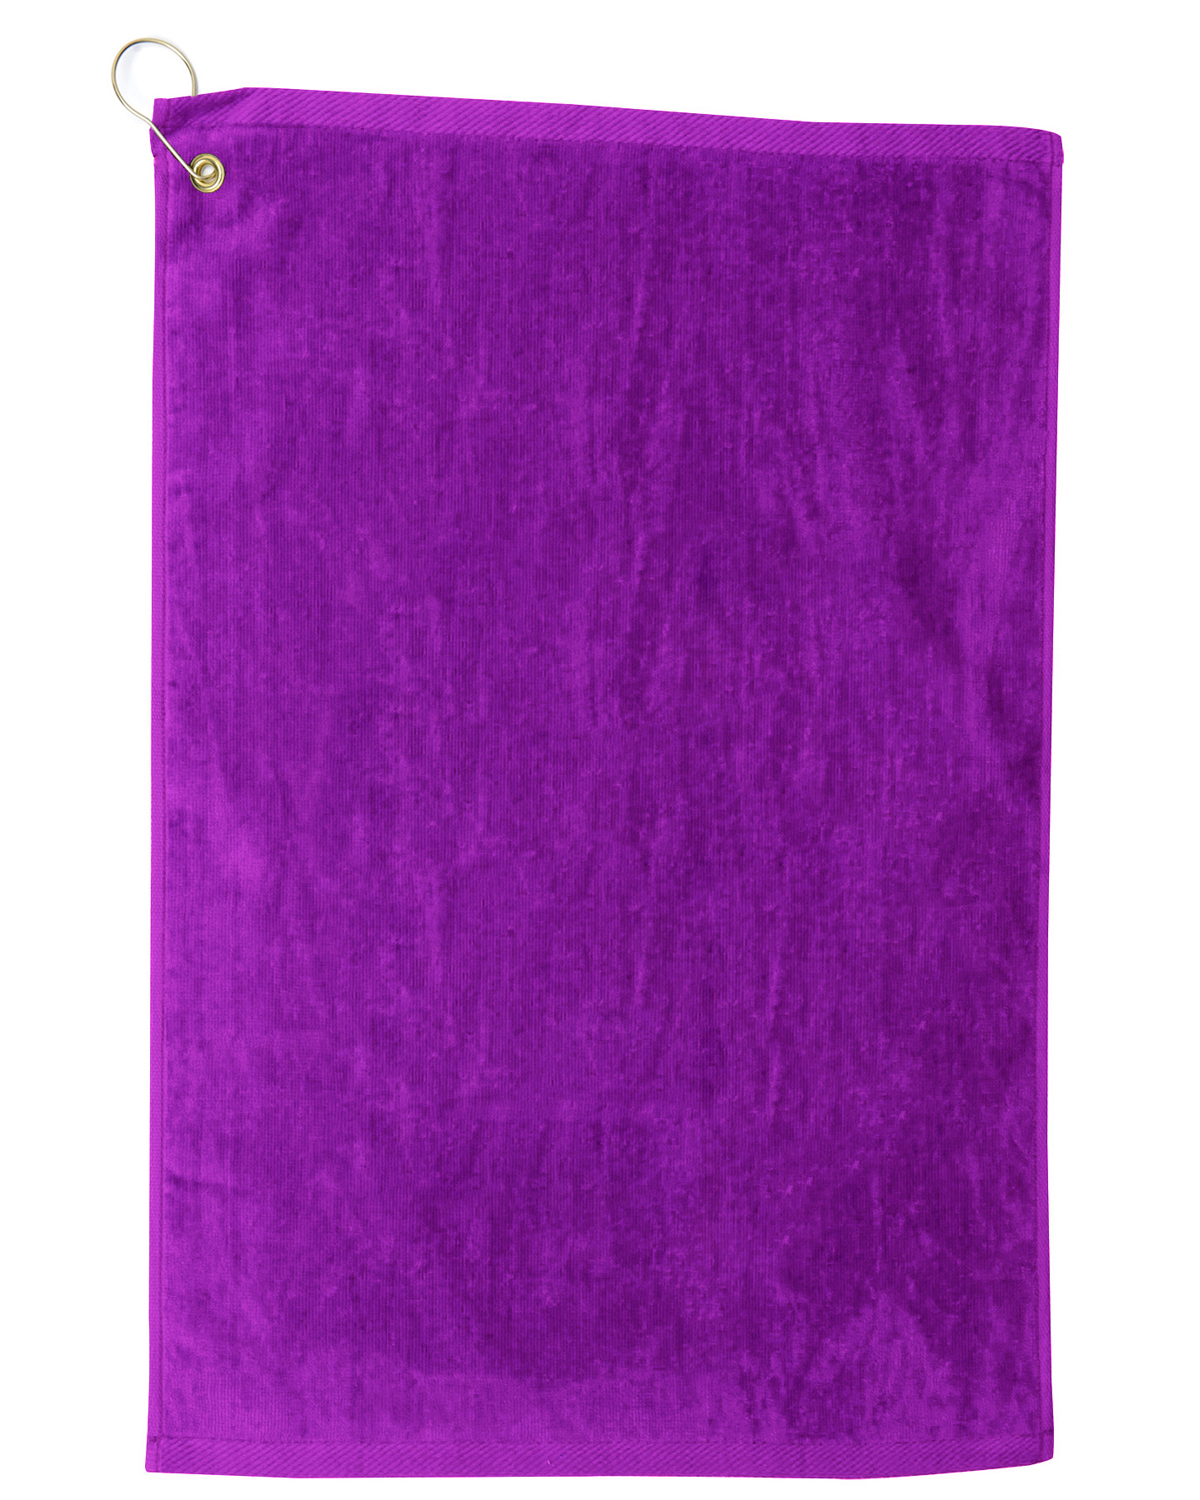 click to view PURPLE